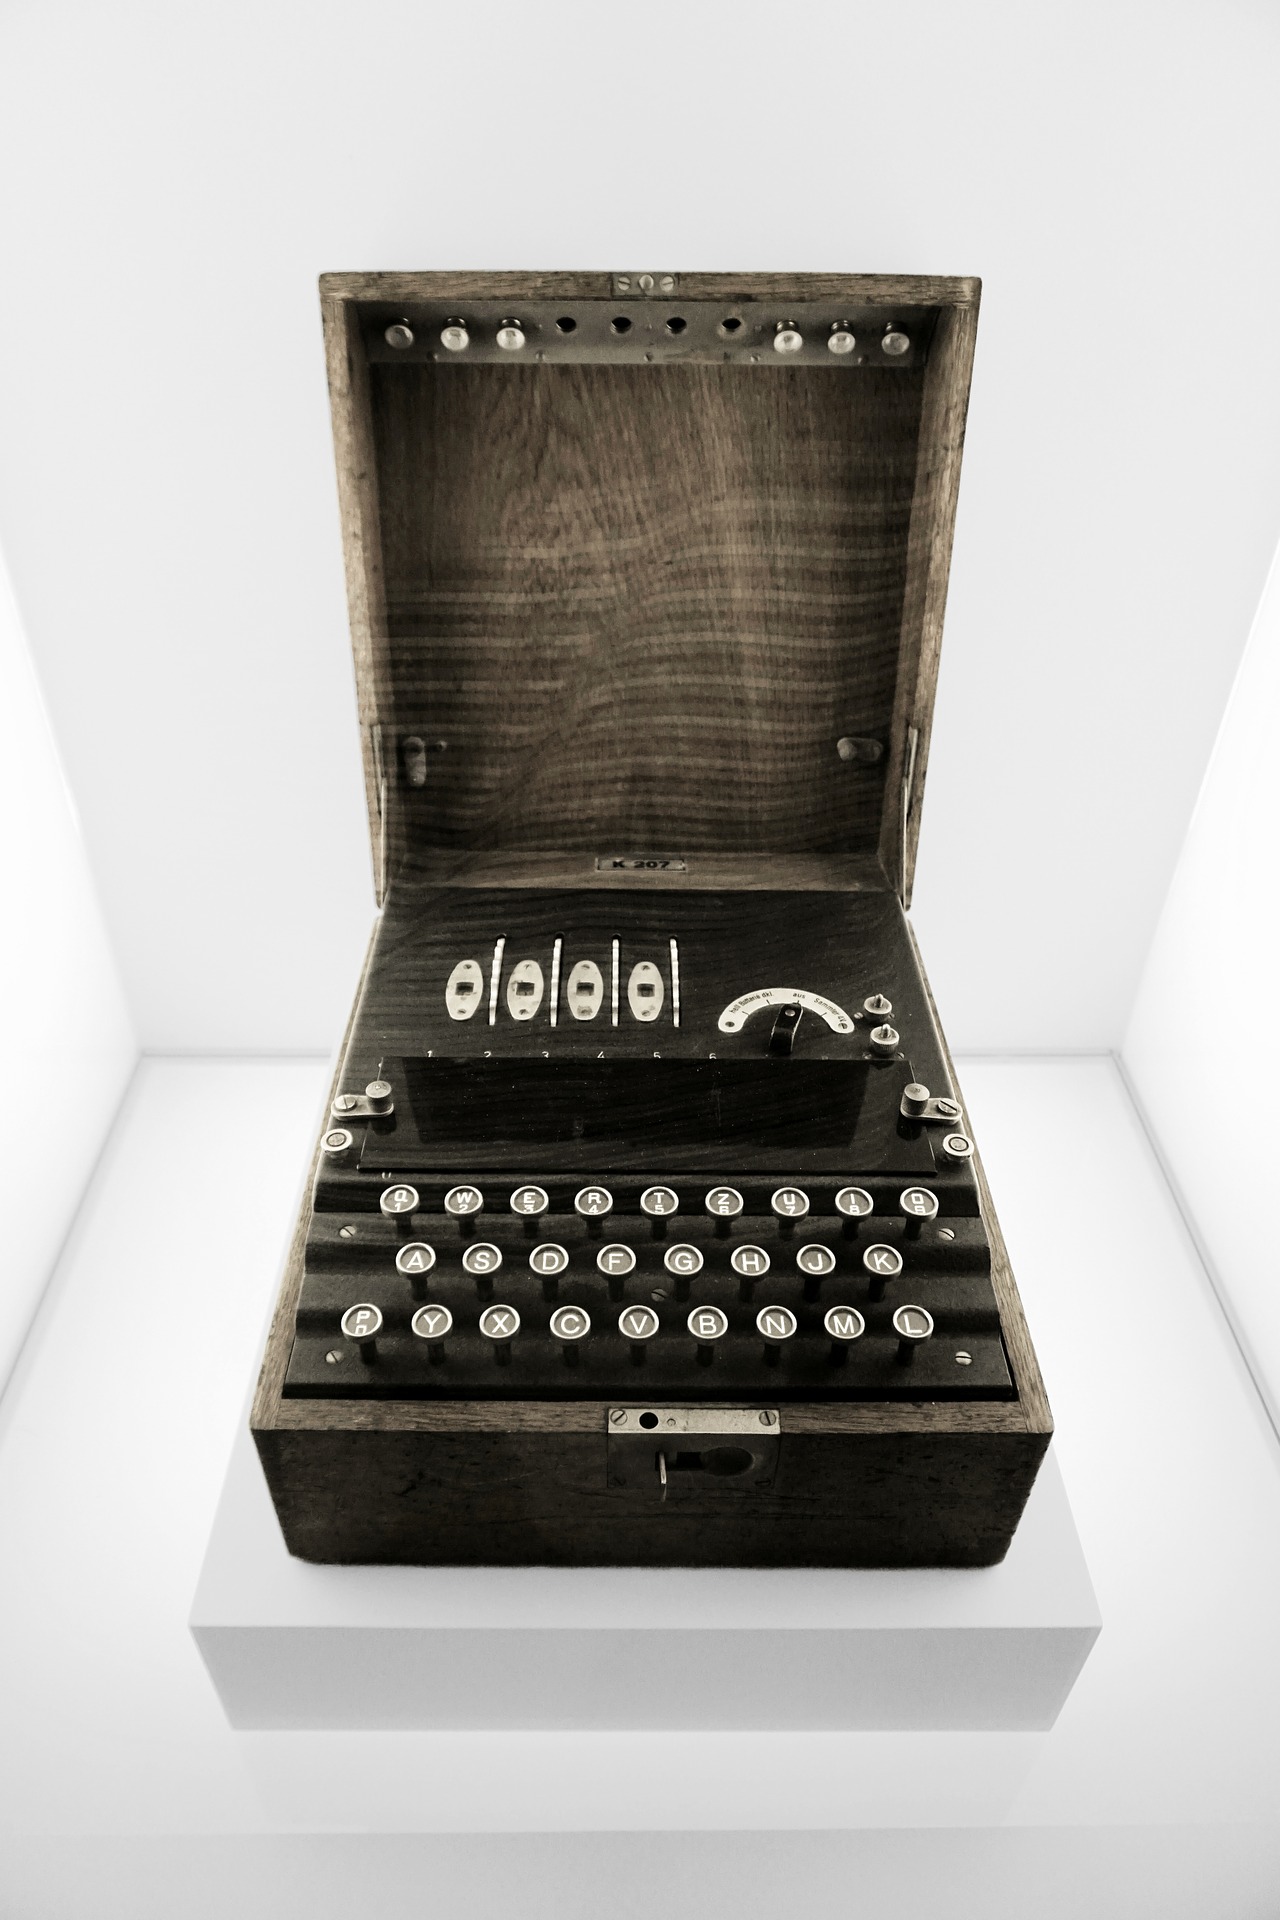 An enigma machine, used by German forces in the Second World War to send coded messages